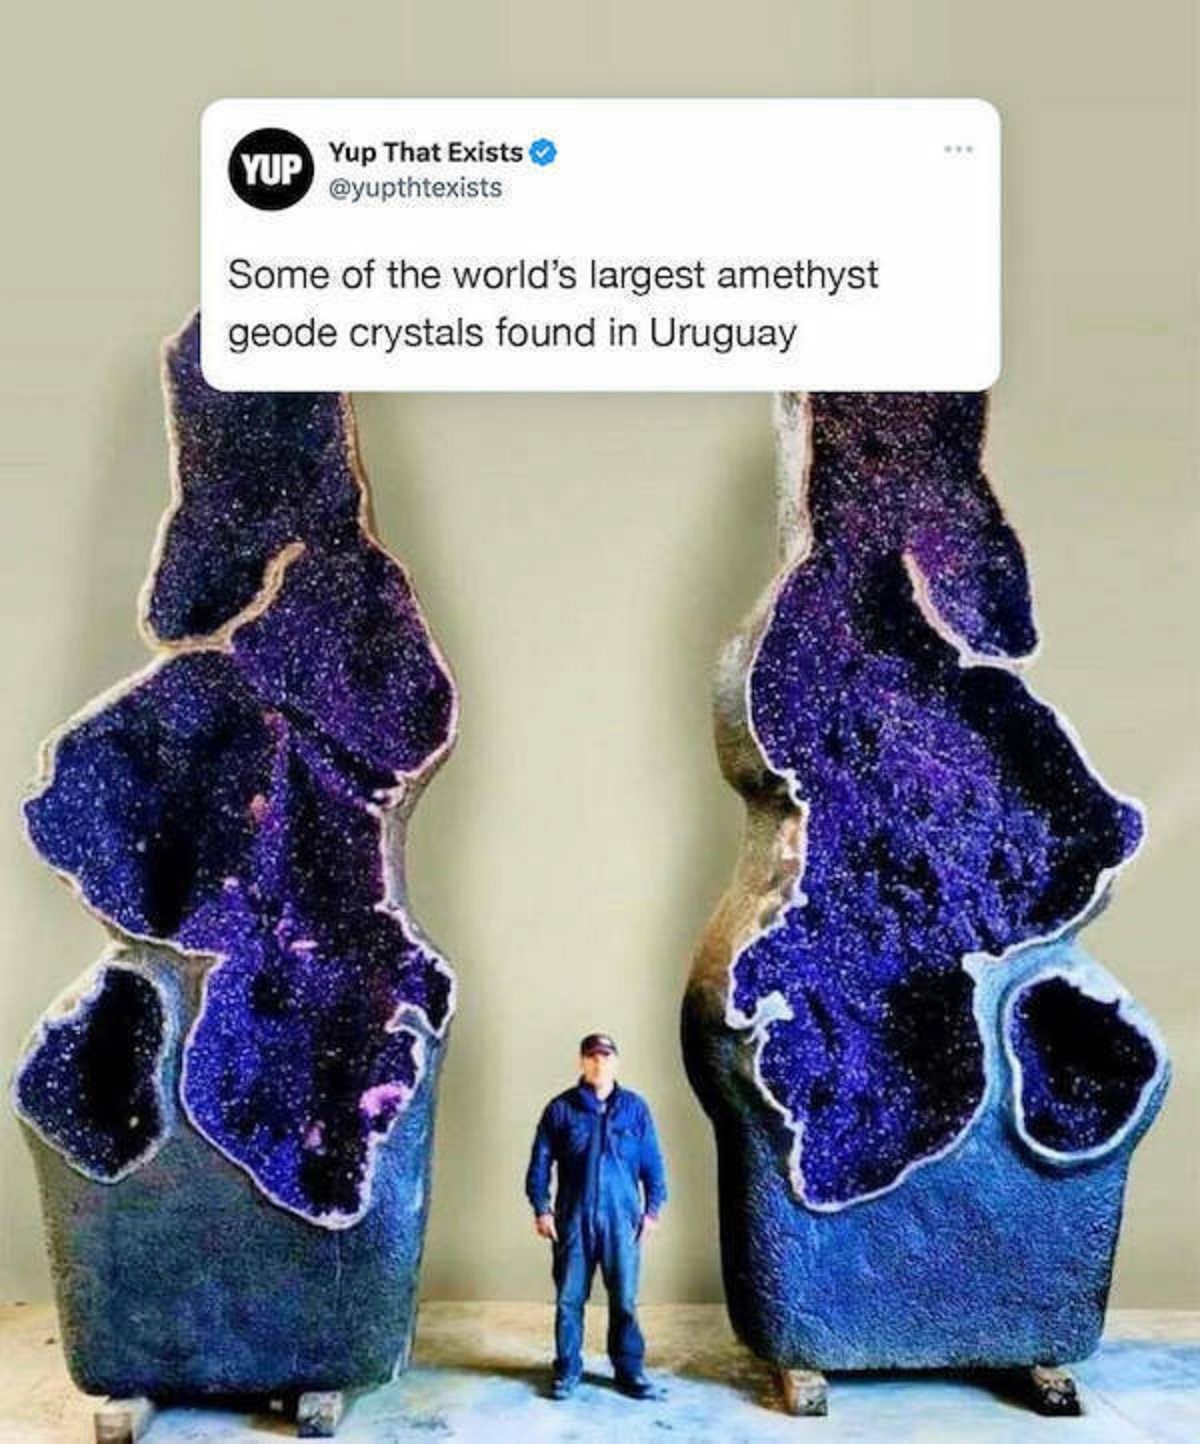 uruguay amethyst geode - Yup Yup That Exists Some of the world's largest amethyst geode crystals found in Uruguay